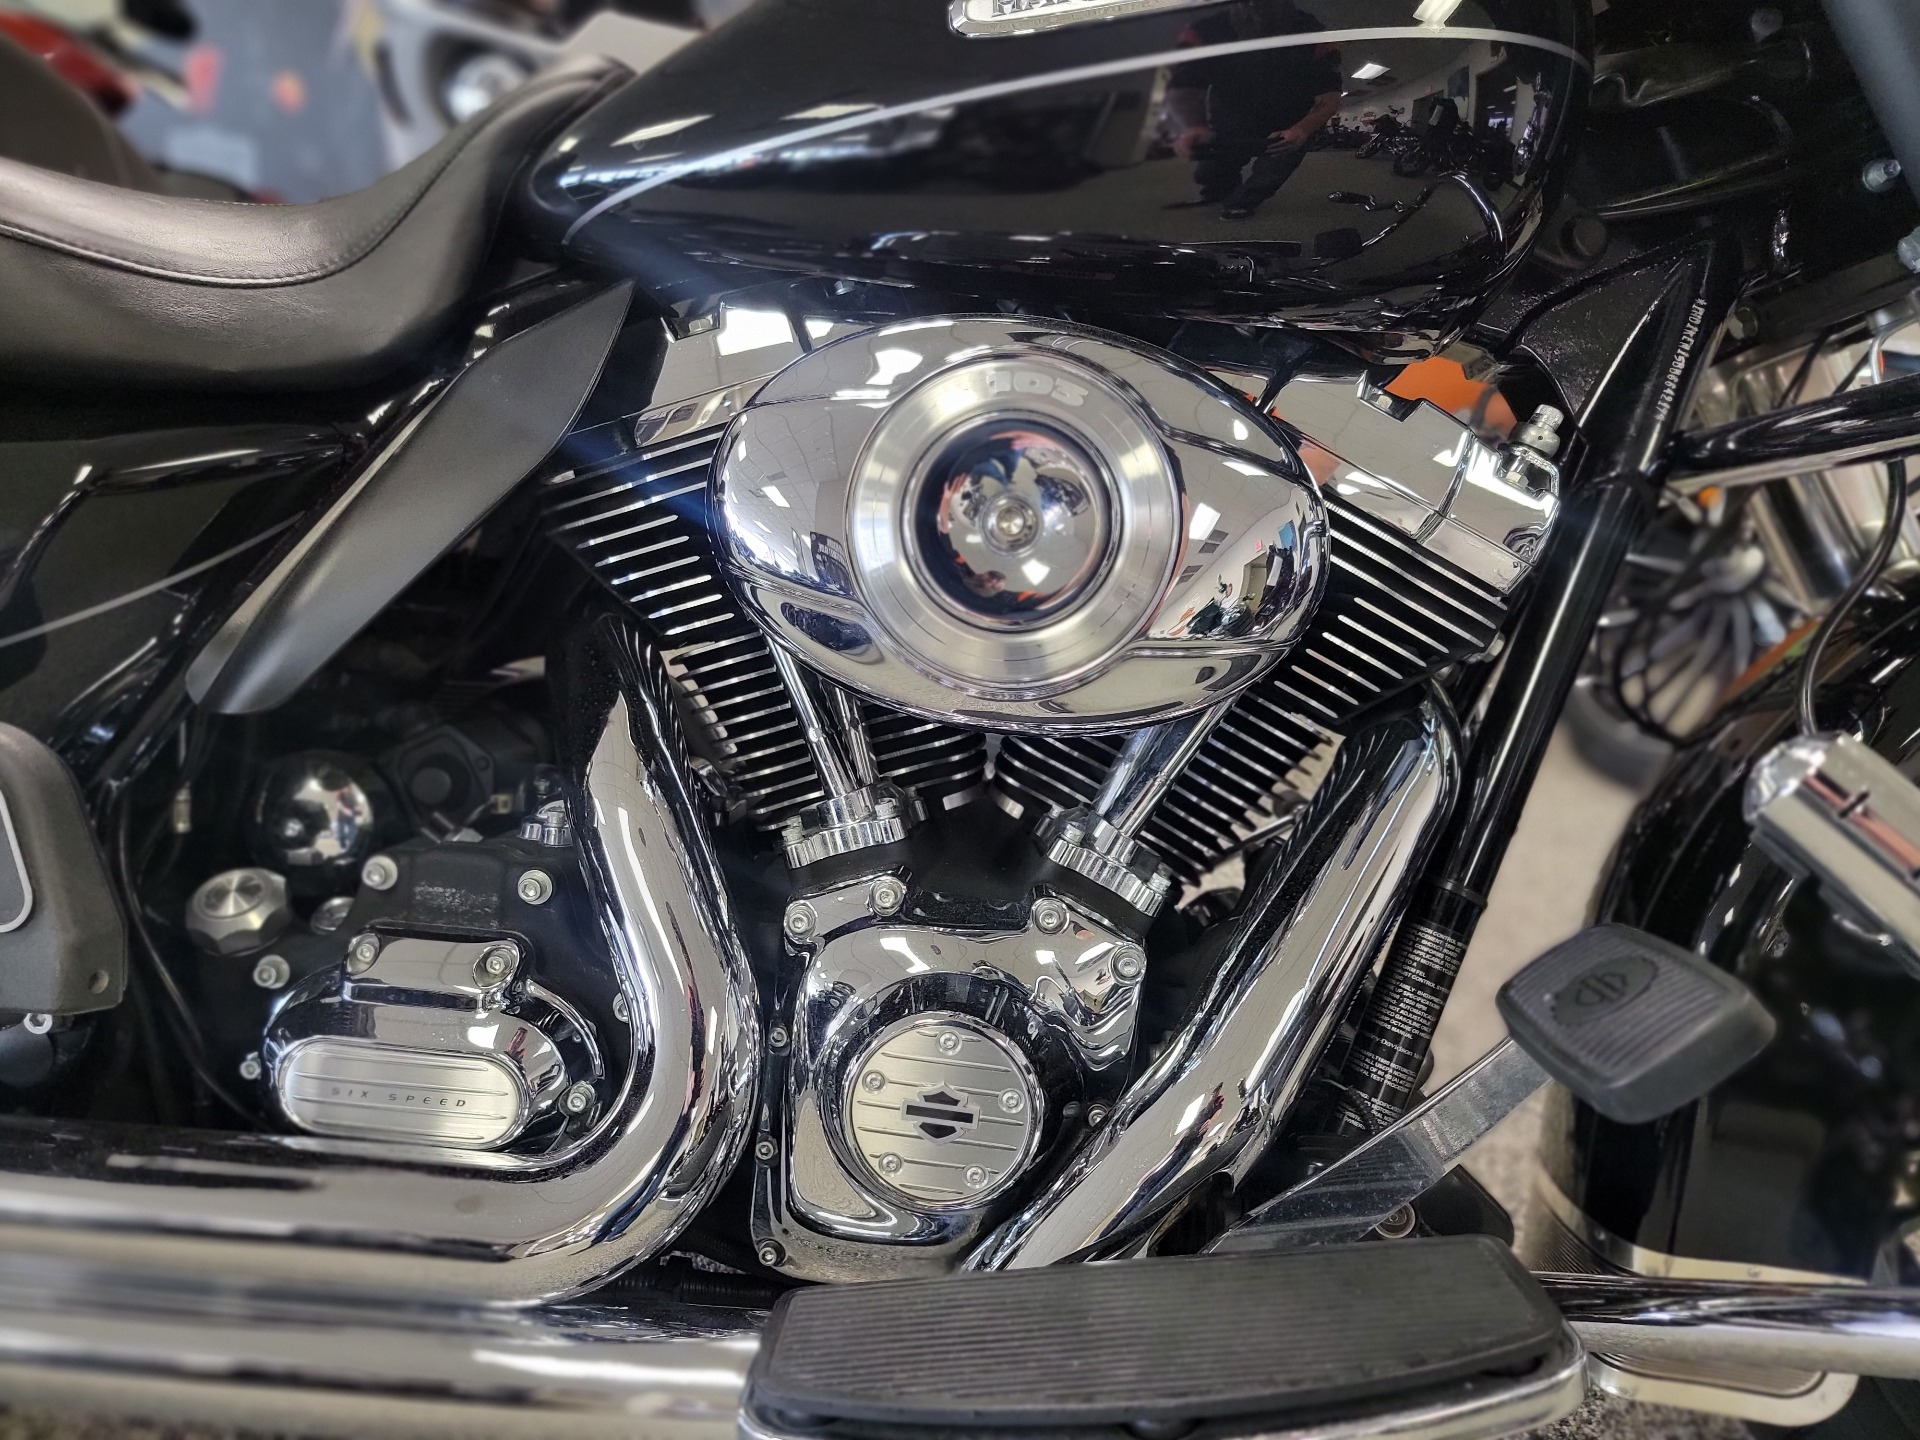 2011 Harley-Davidson Electra Glide® Ultra Limited in Knoxville, Tennessee - Photo 2